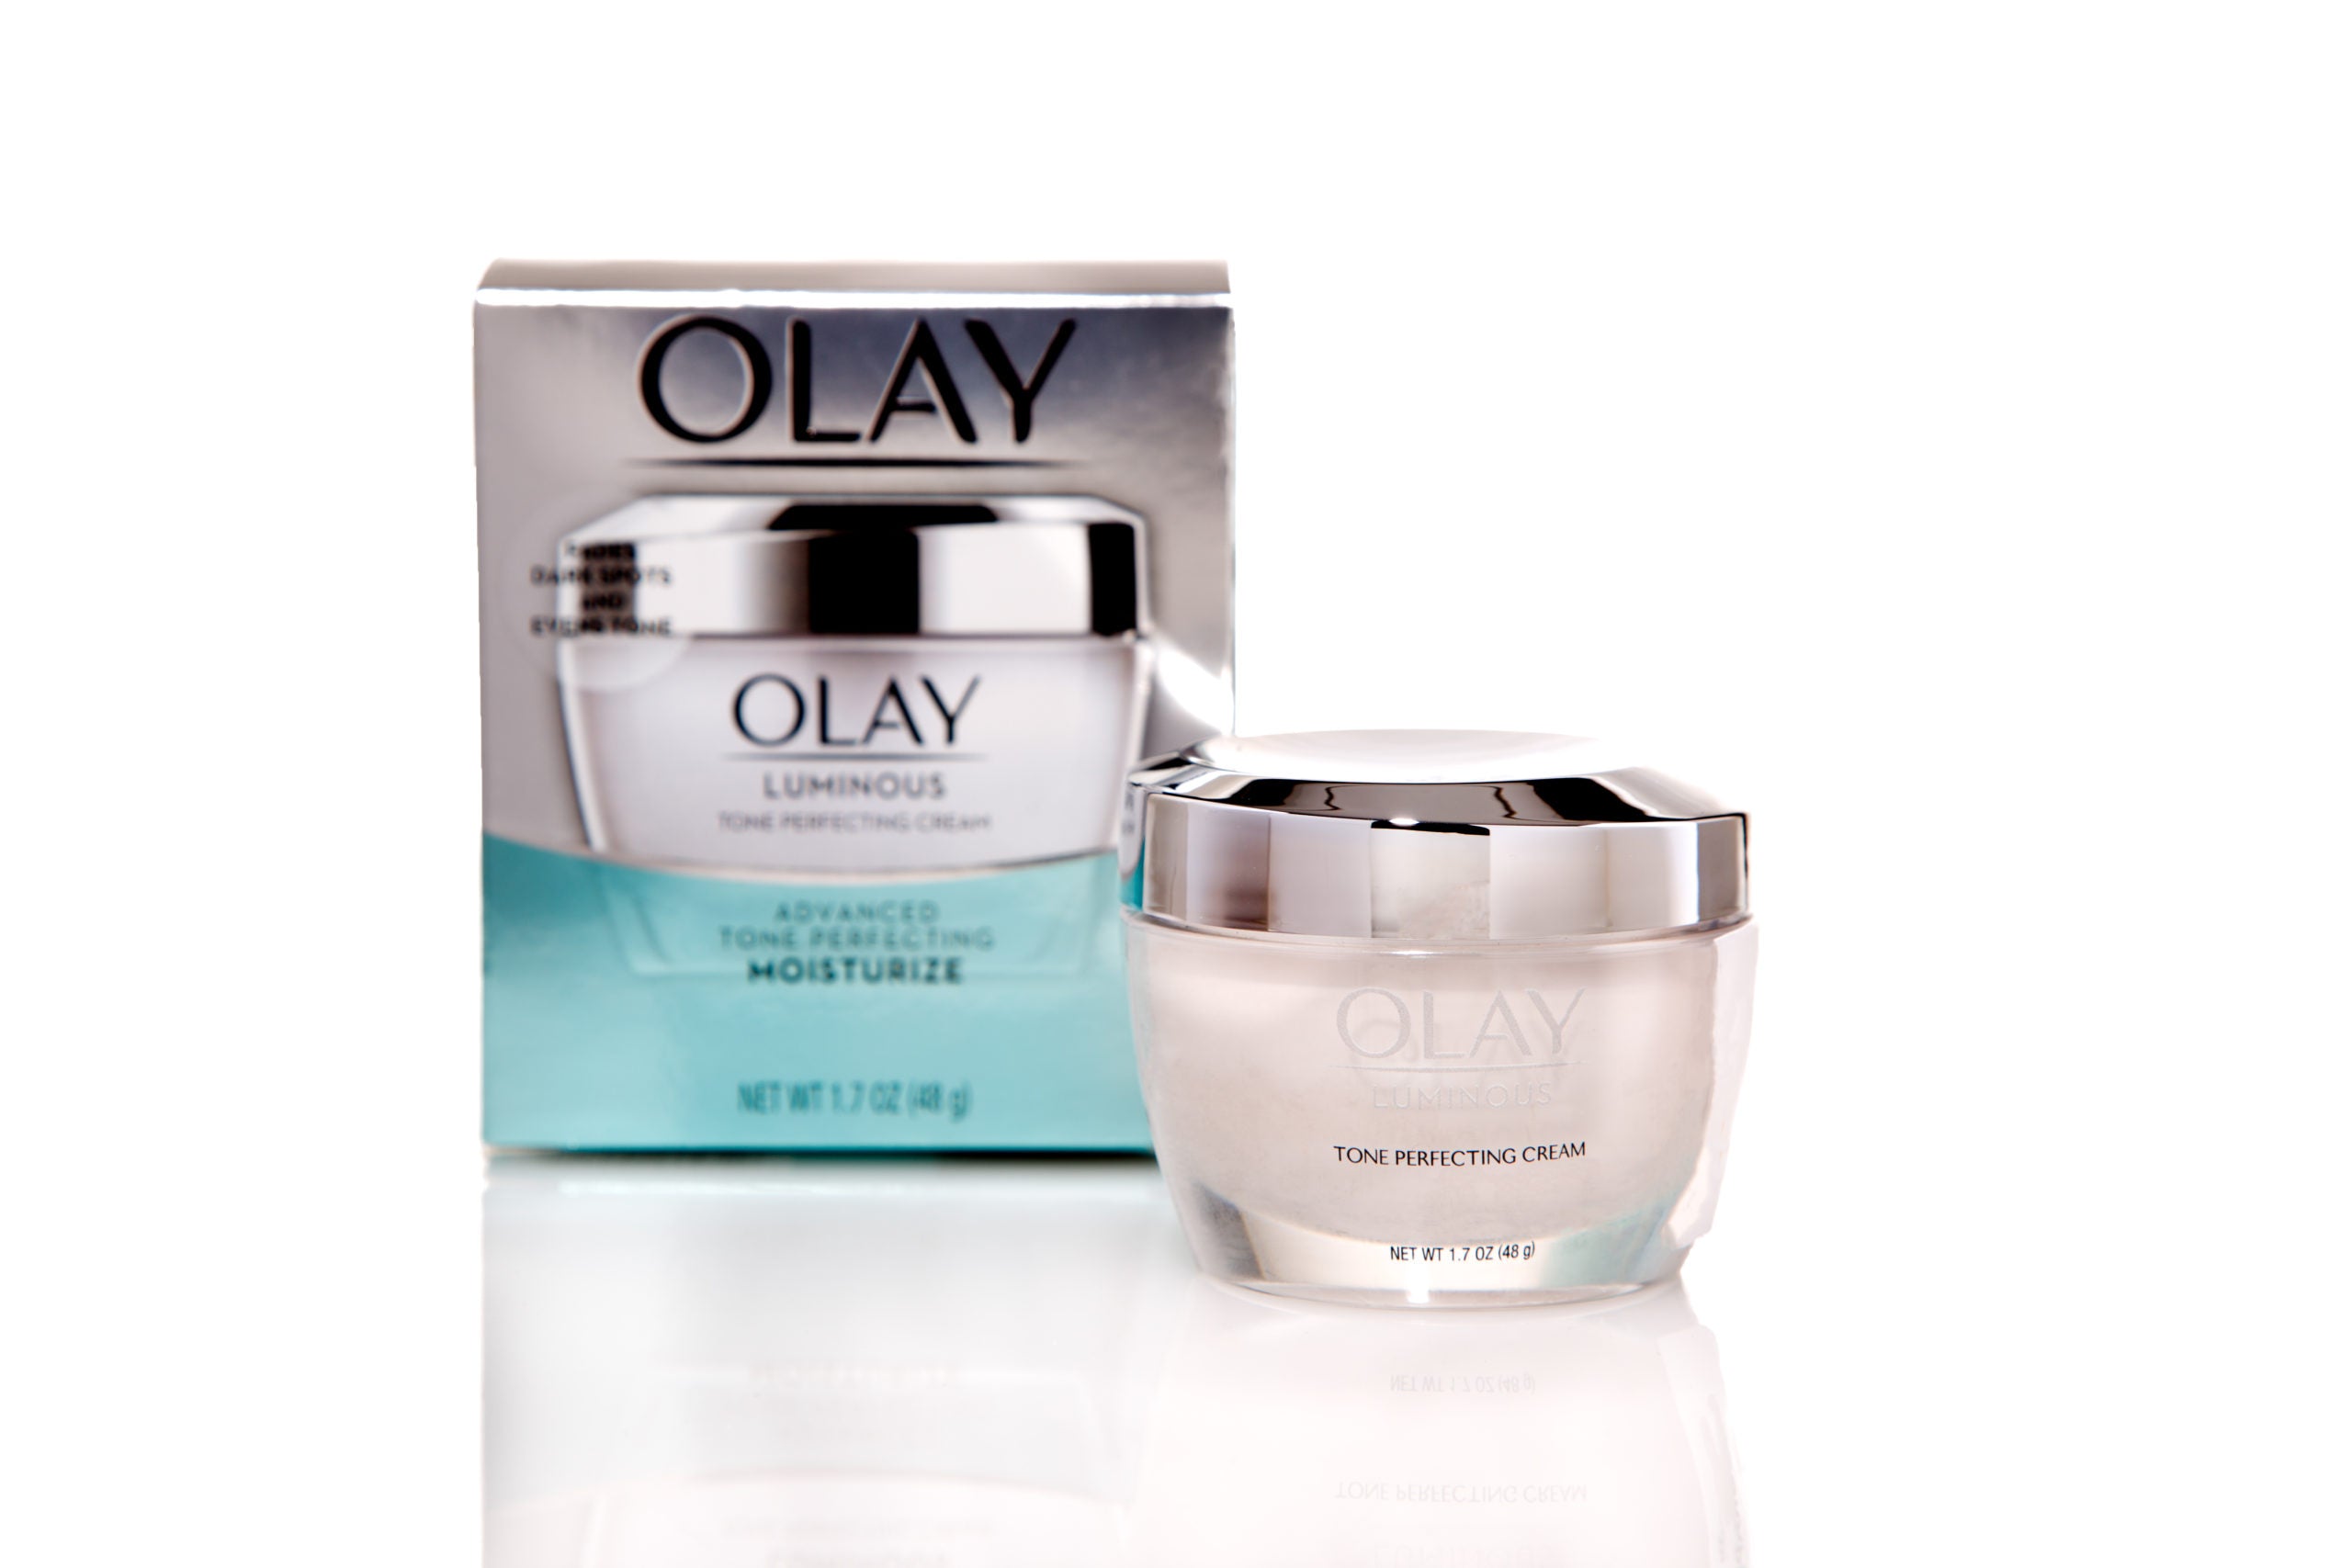 Skincare Review, Ingredients, Swatches, Trend 2017, 2018: New Insights Into 'Nature vs Nurture', The Great Skin Aging Debate, Olay Regenerist, Luminous, Total Effects